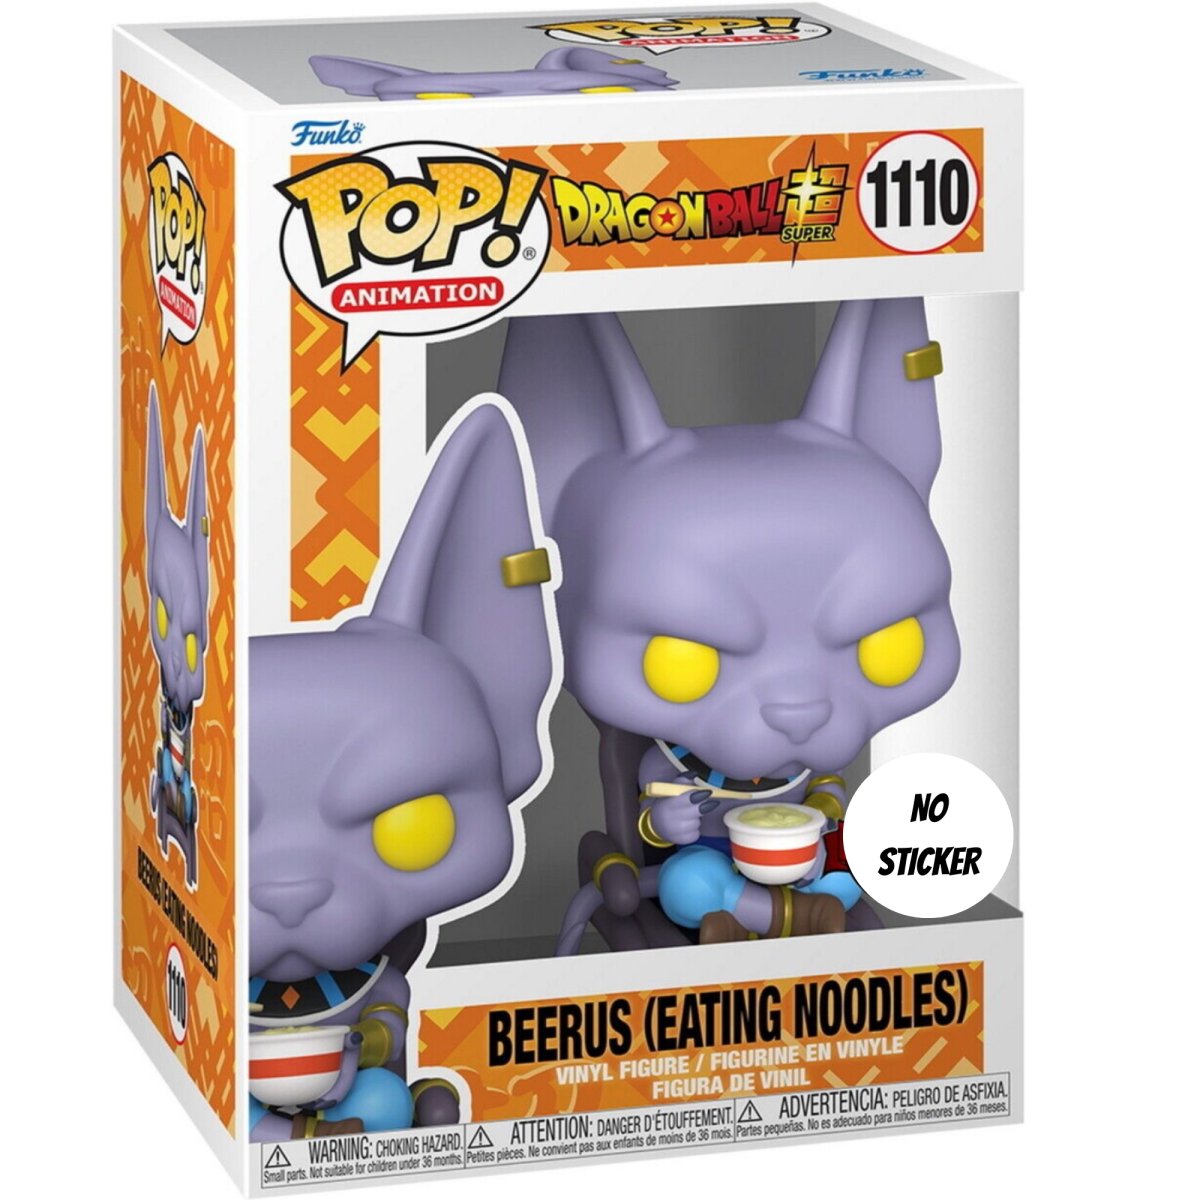 Dragon Ball Z Super - Beerus (Eating Noodles) (Special Edition) #1110 - Funko Pop! Vinyl Anime - Persona Toys